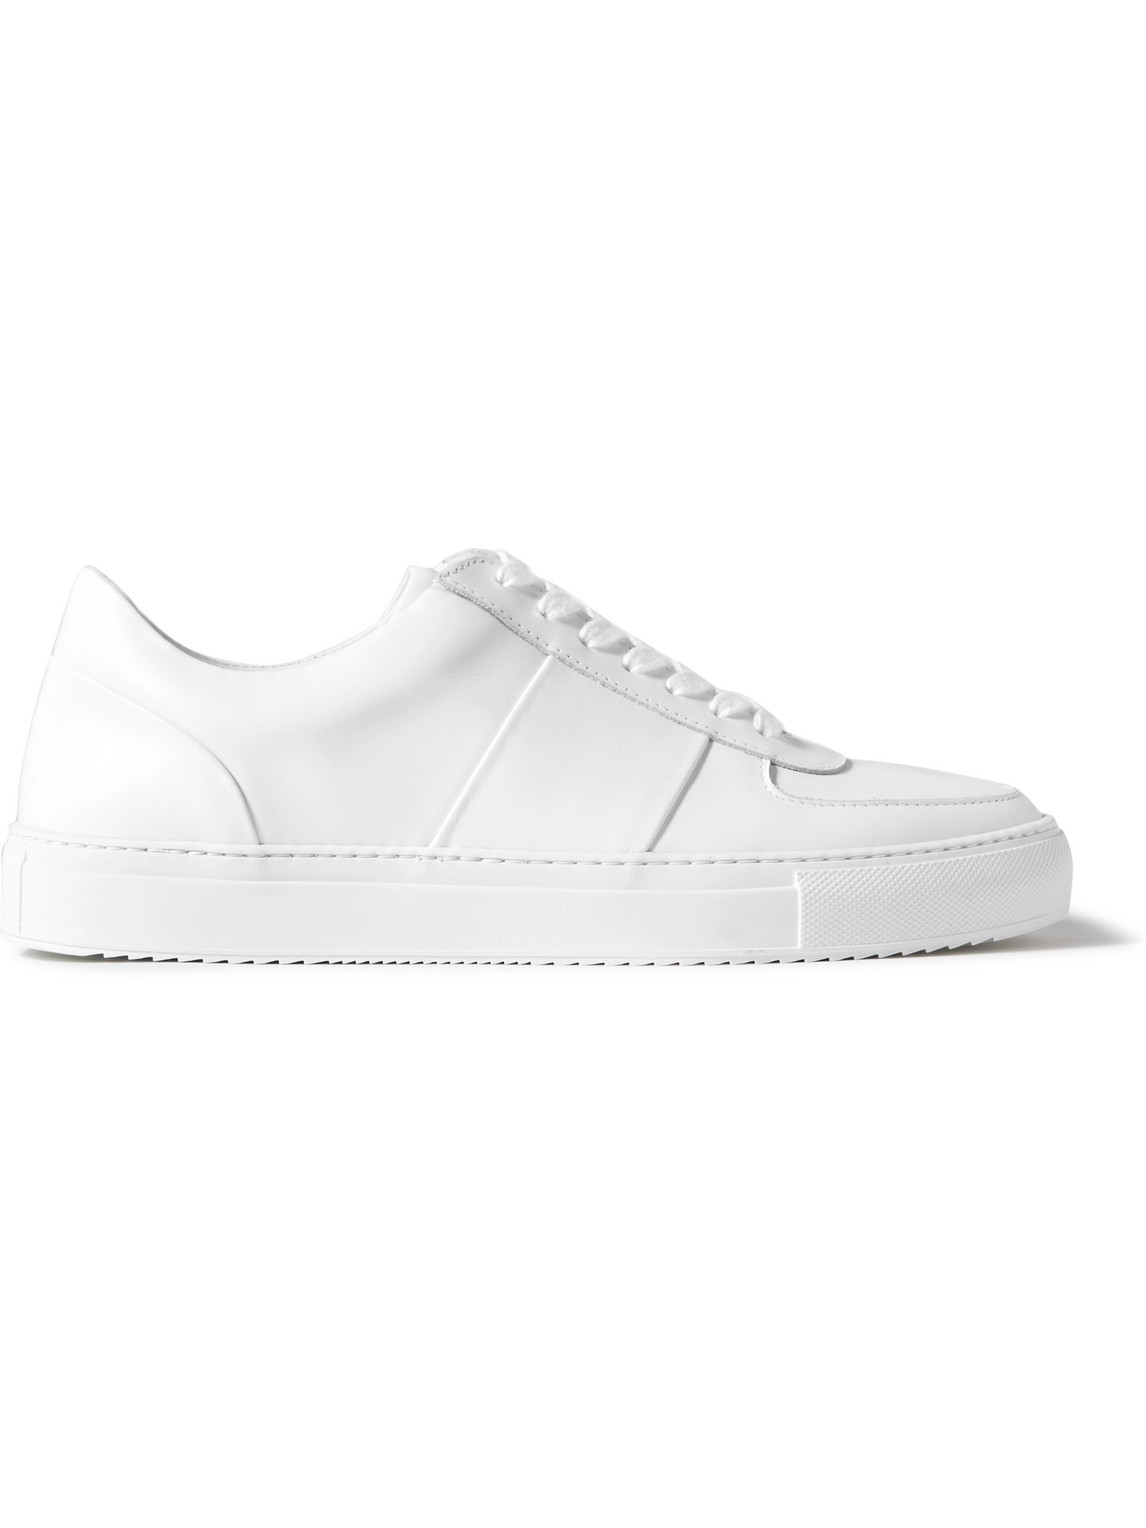 Mr P Larry Leather Sneakers In White